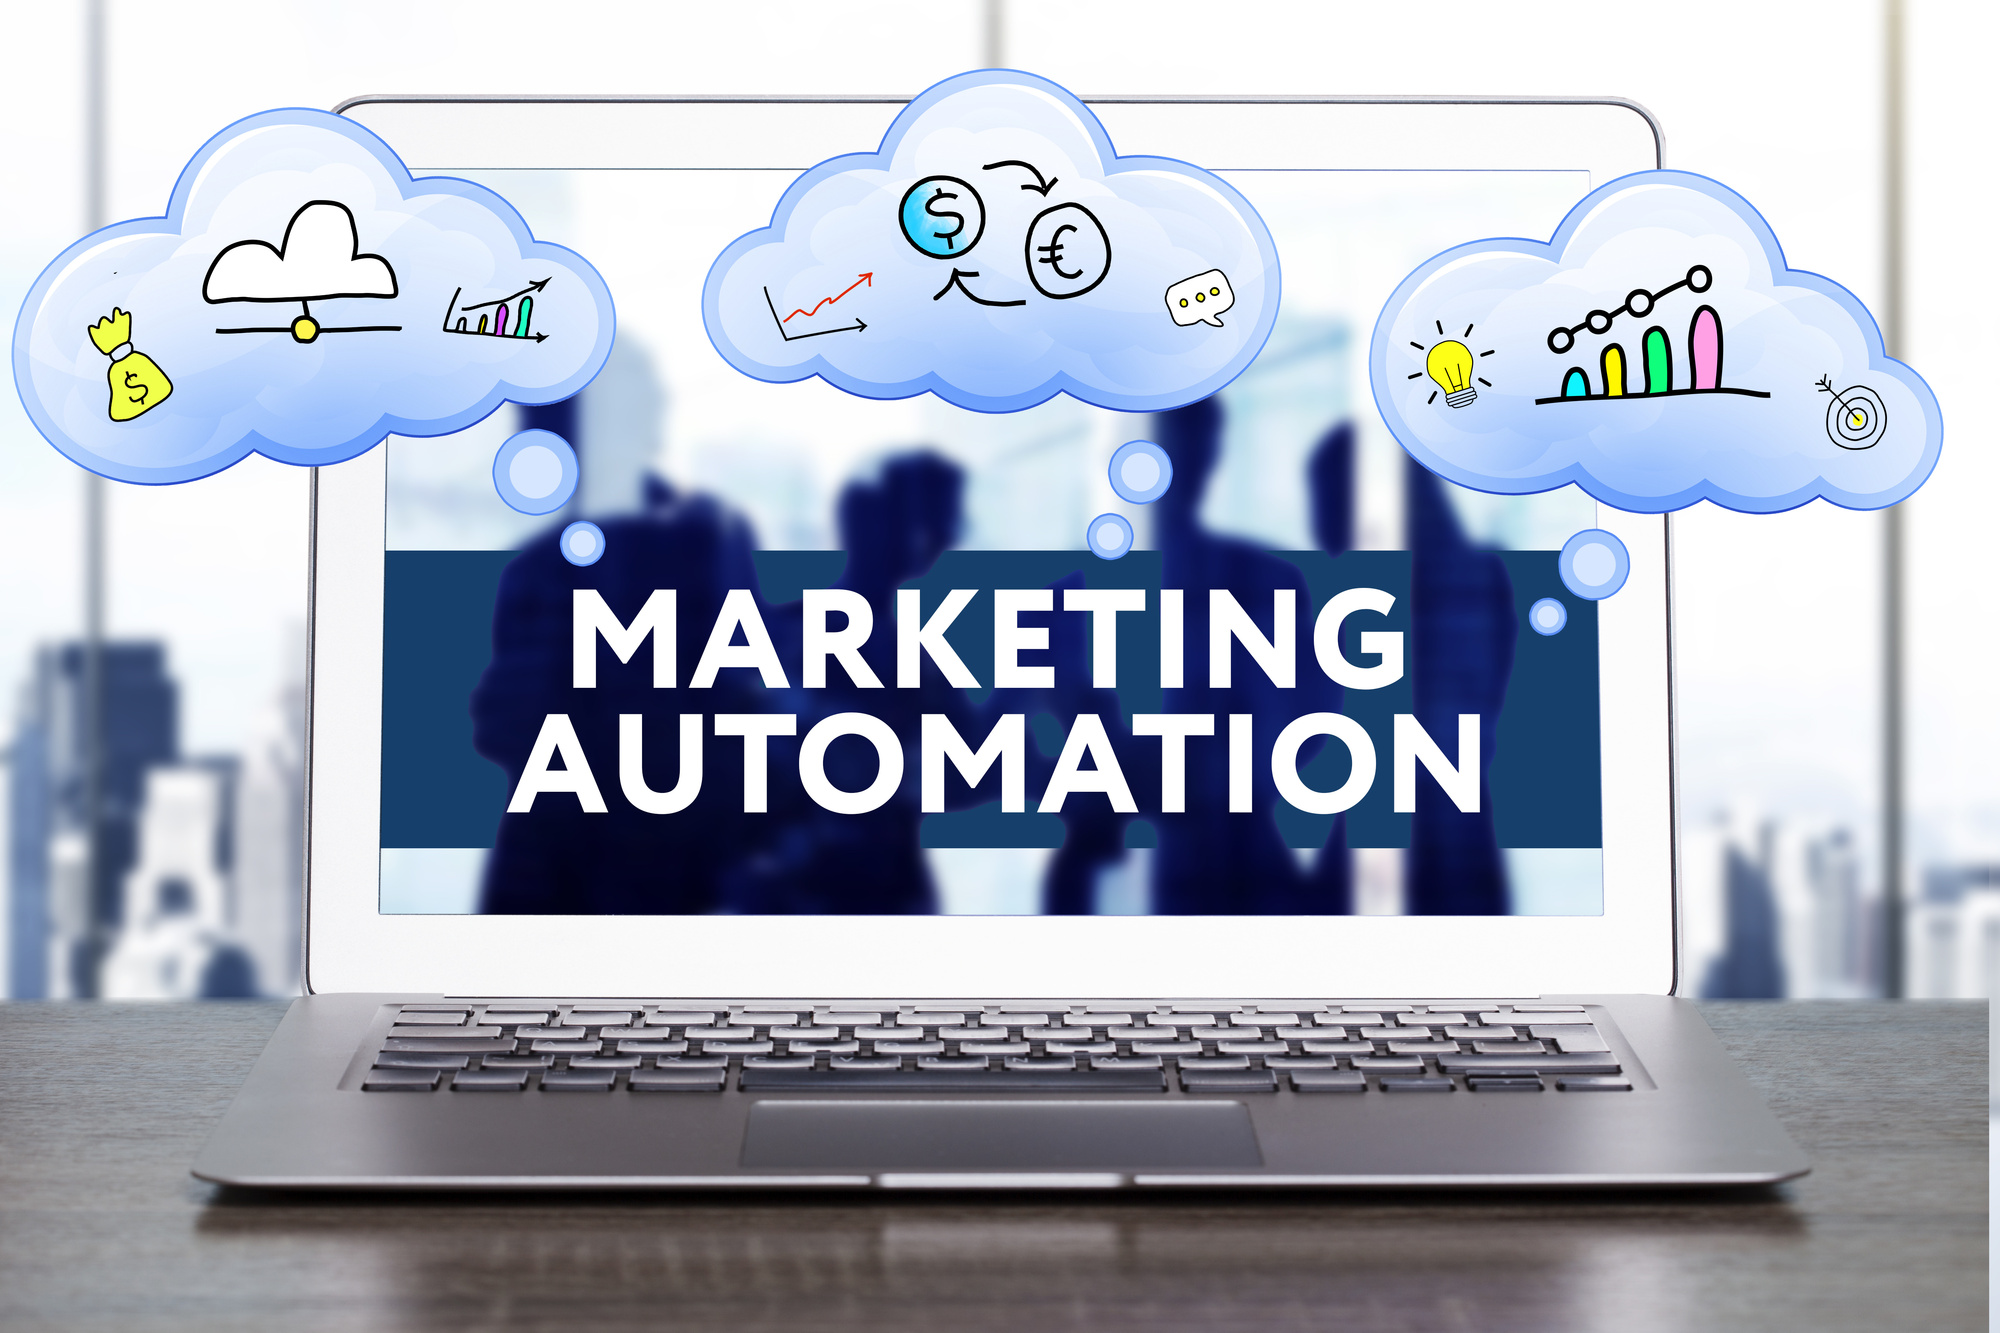 5 Benefits of Marketing Automation That You Should Take Advantage Of.jpg